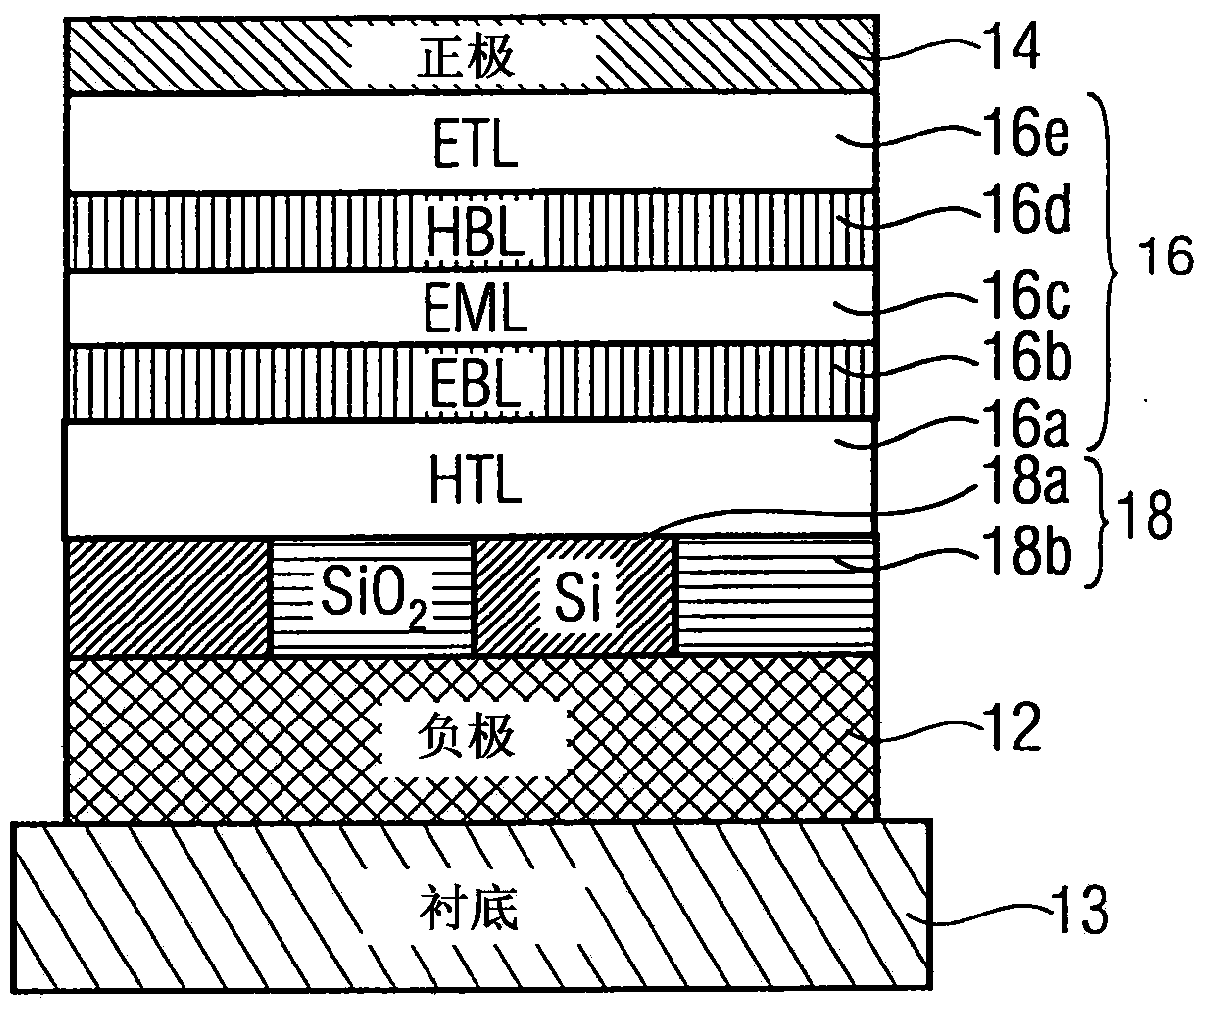 Electroluminescent light emission device having an optical grating structure, and method for production thereof